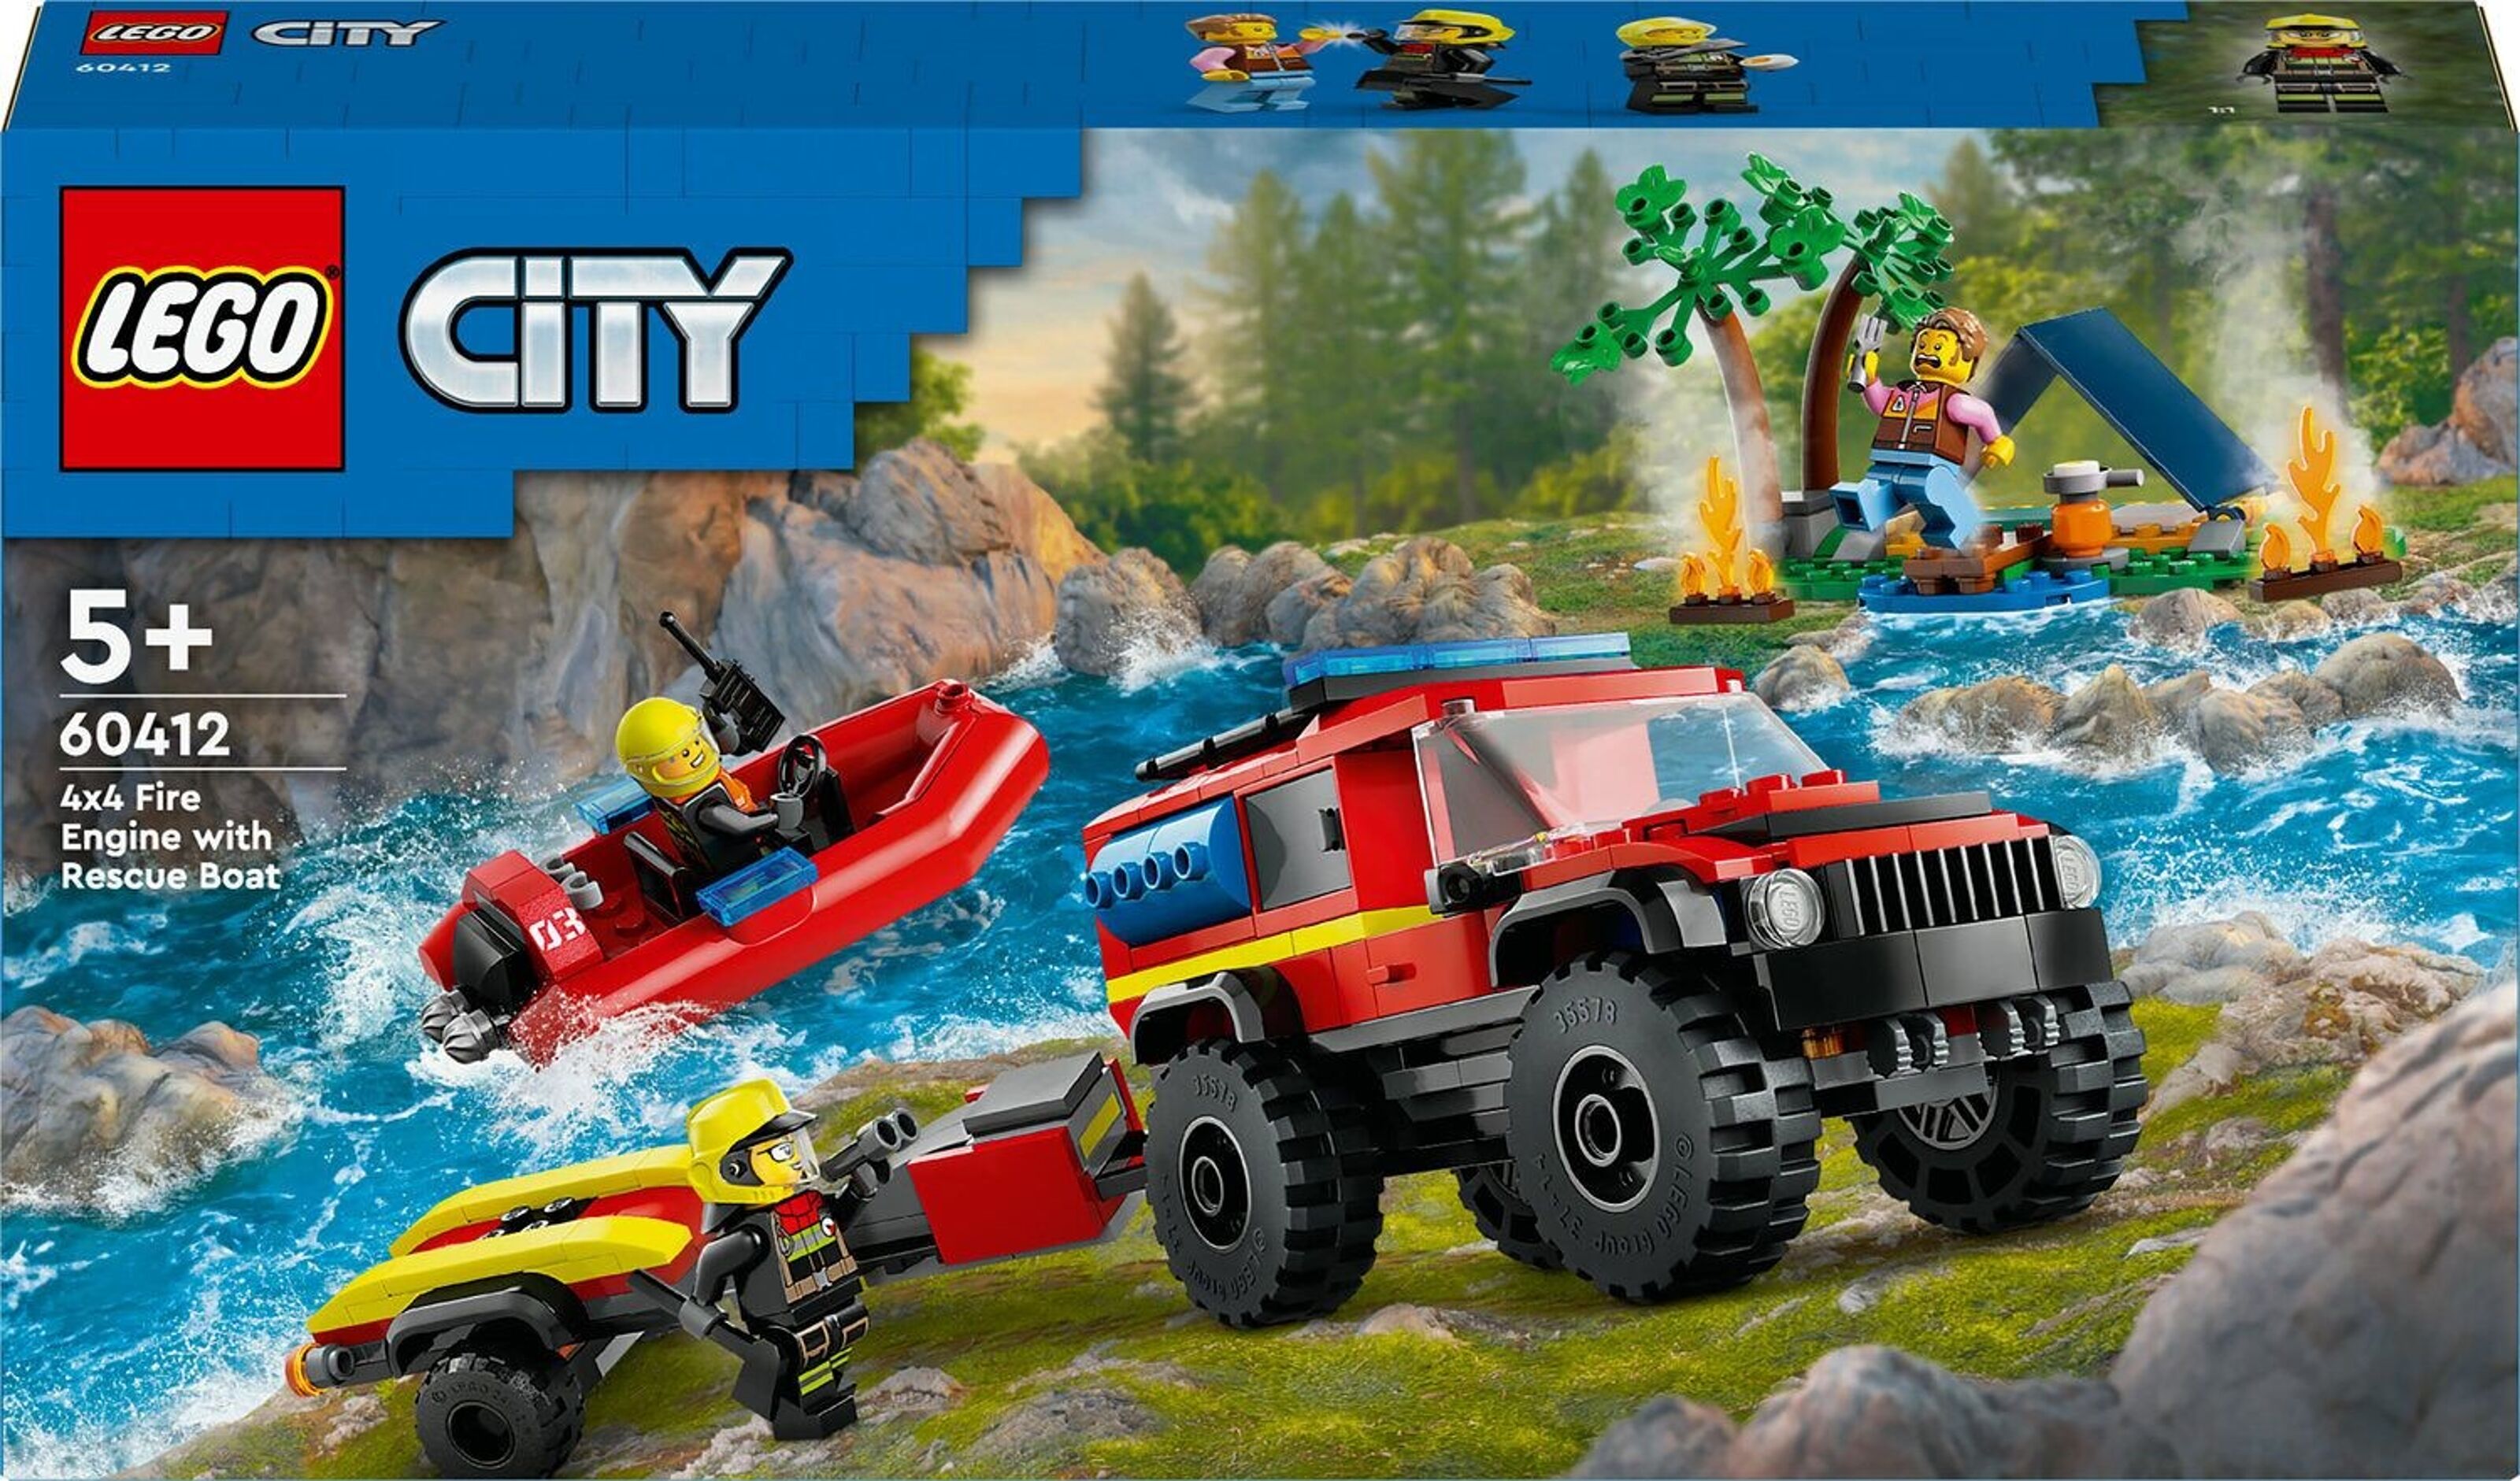 LEGO City 4x4 Fire Truck with Rescue Boat • Set 60412